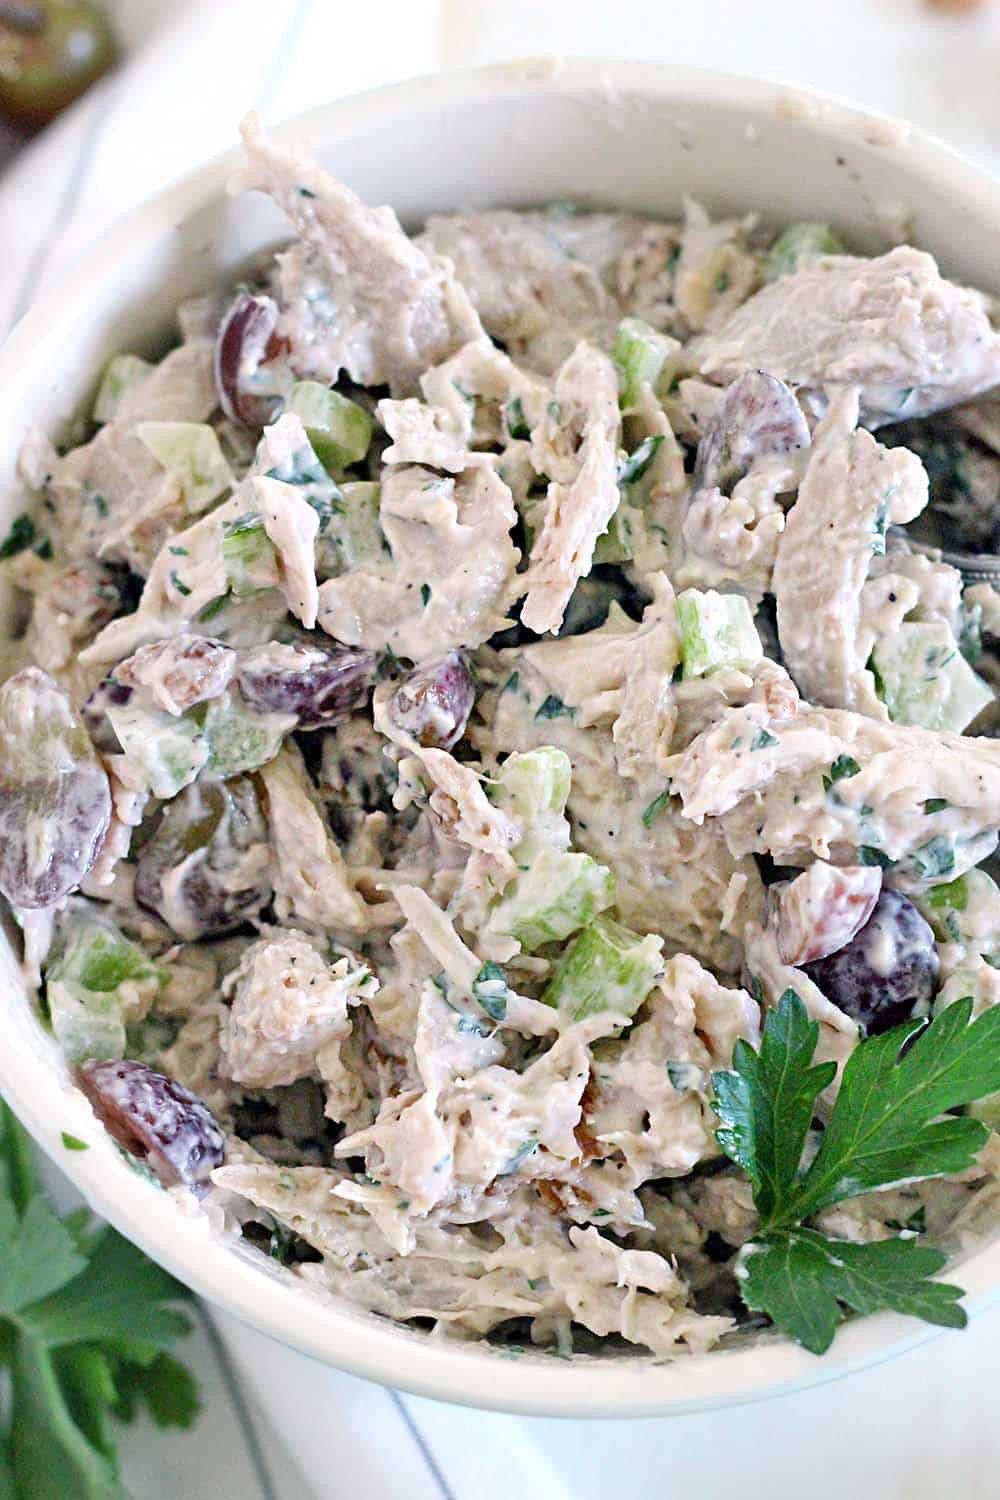 Chicken Salad Sandwich Recipe Grapes
 Awesome Chicken Salad with grapes and walnuts